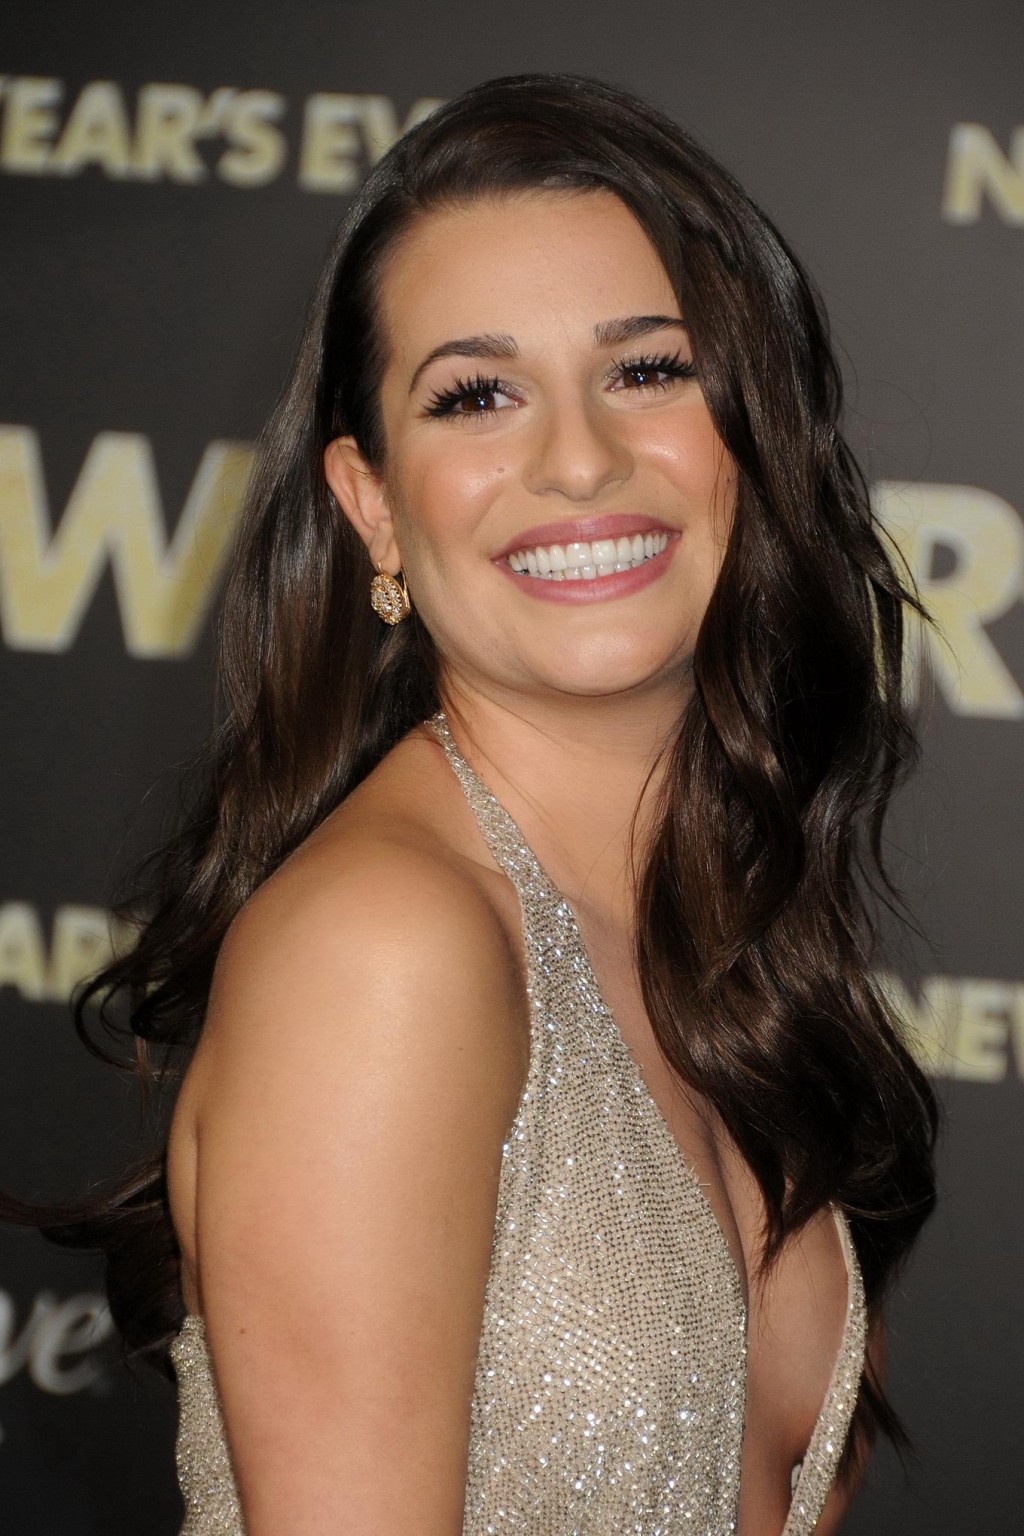 Lea Michele braless showing side boob at the 'New Year's Eve' premiere in LA #75279856